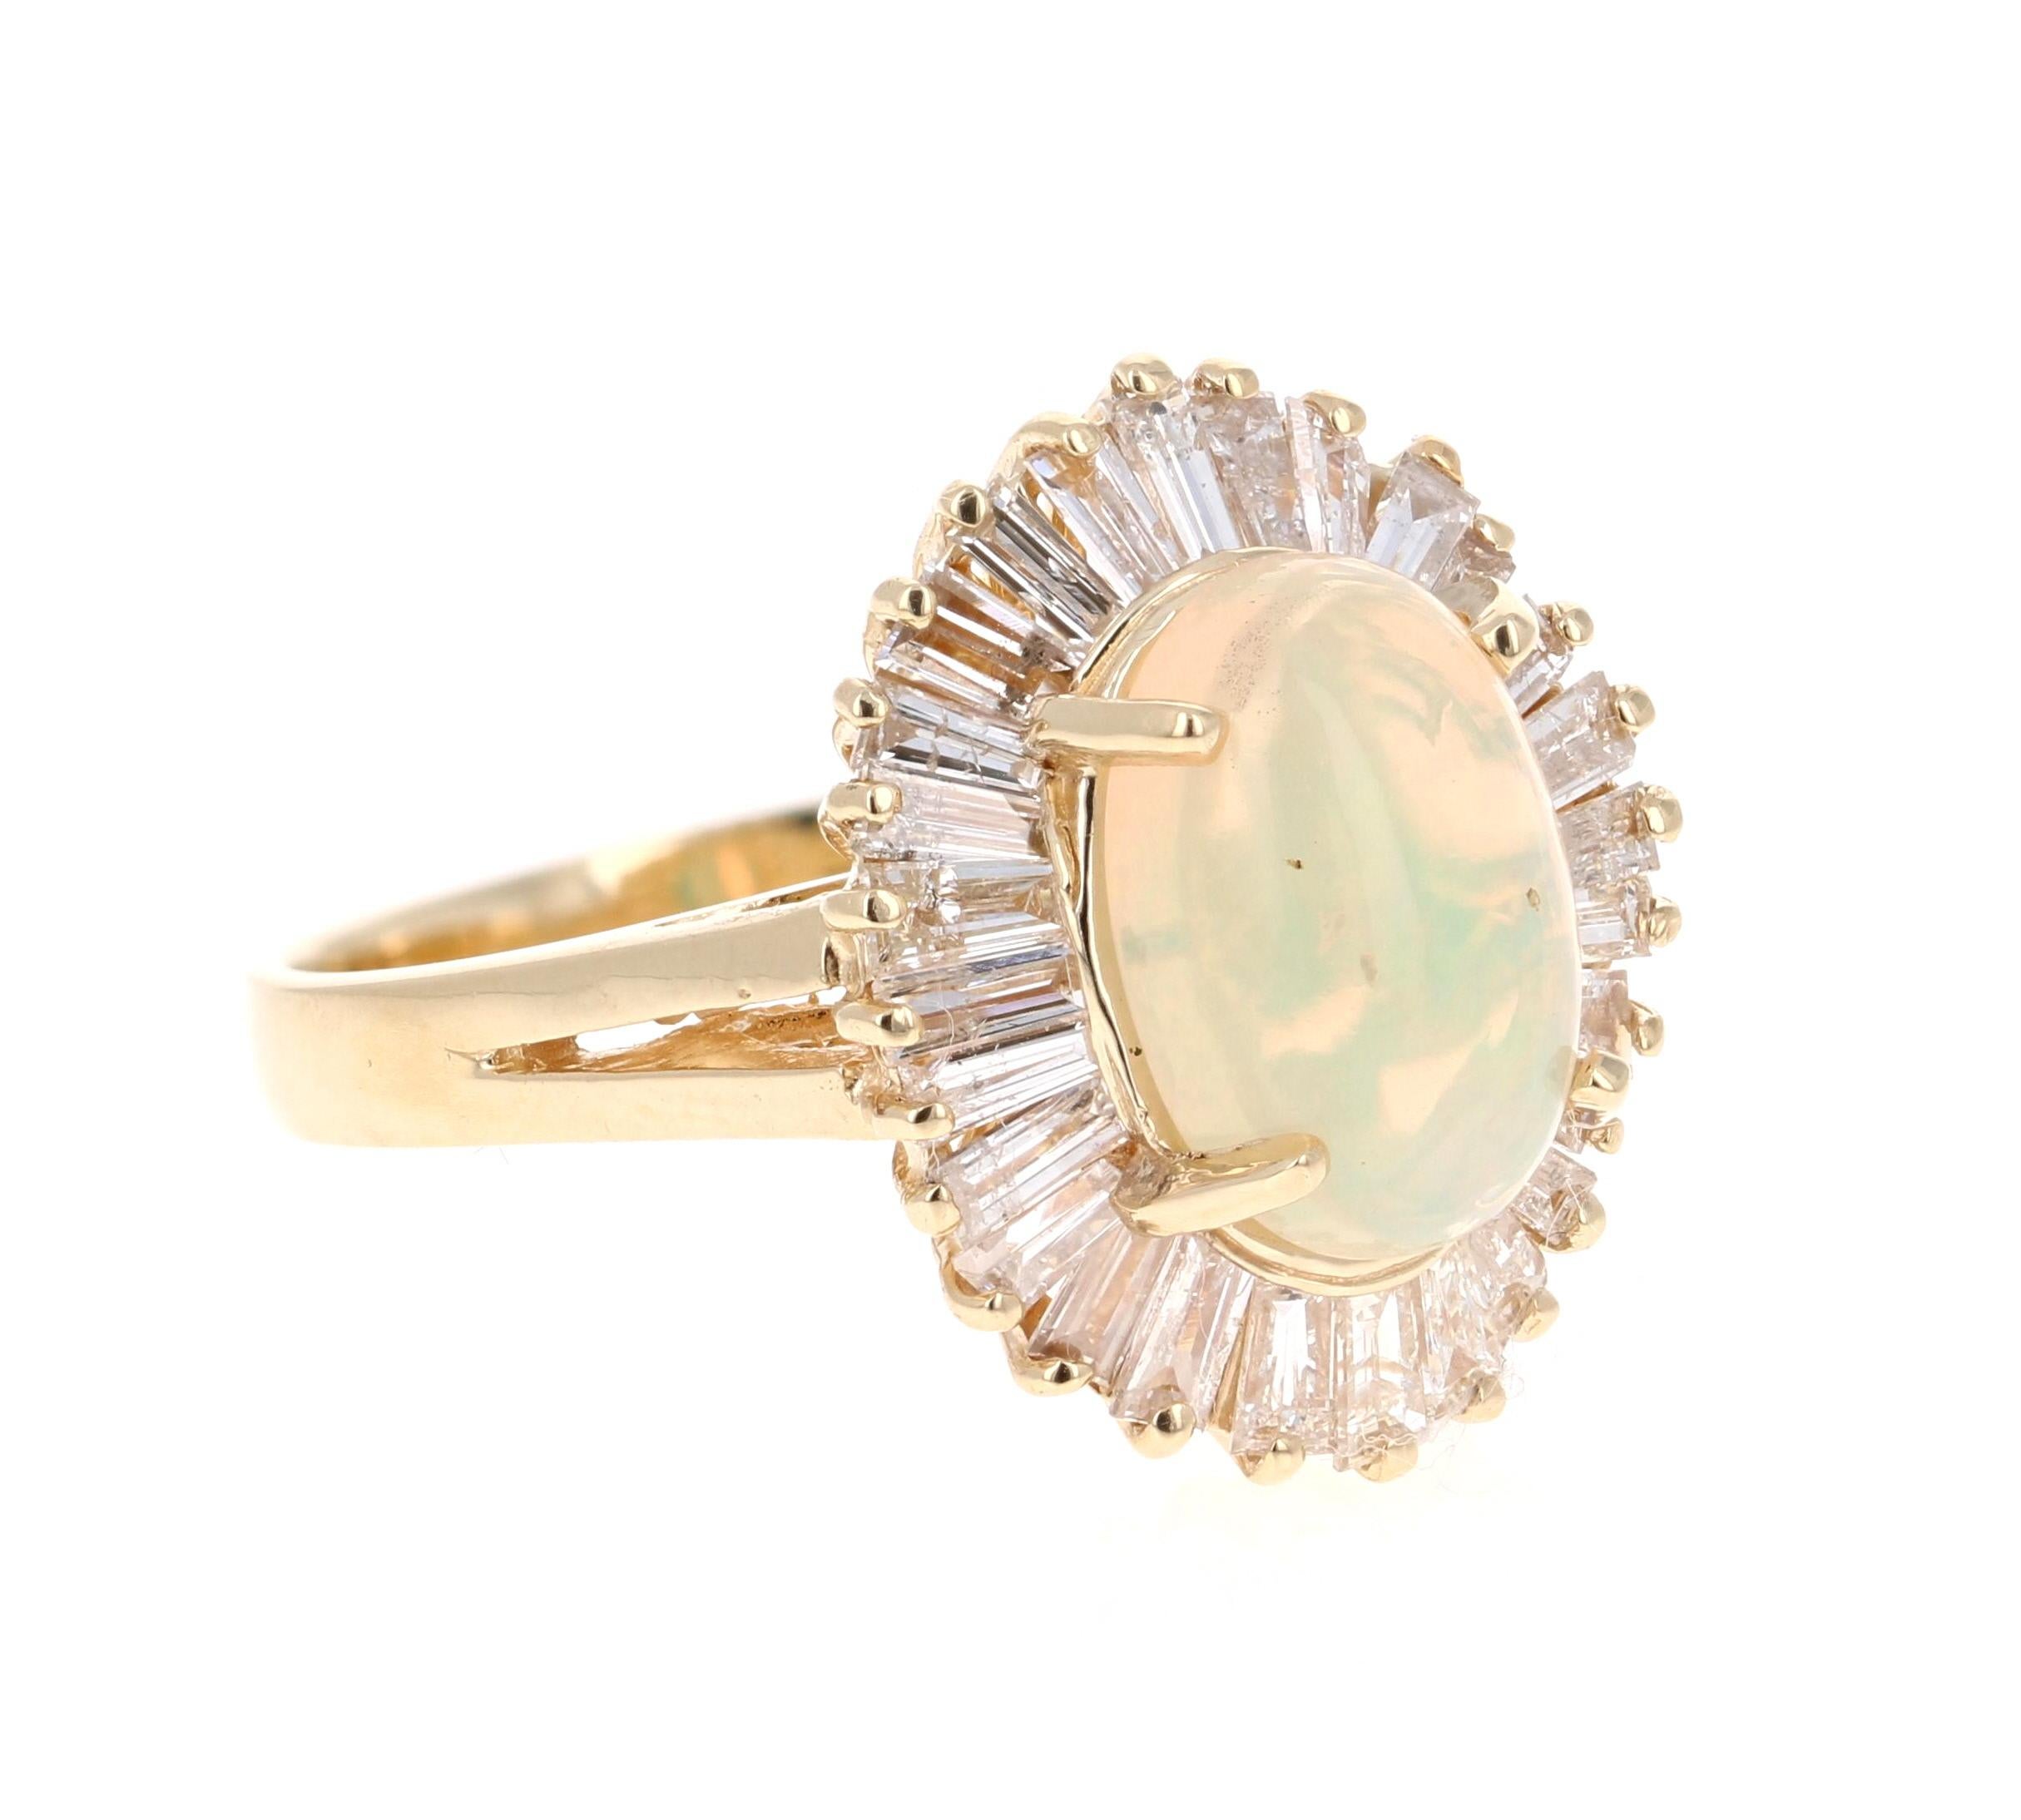 Classic Ballerina Design Opal and Diamond Ring!

This classic ring has a 1.88 carat opulent Opal set in the center of the ring.  The Opal displays flashes of Green and Orange hues.  The Opal is surrounded by a row of  38 Baguette Cut Diamonds that